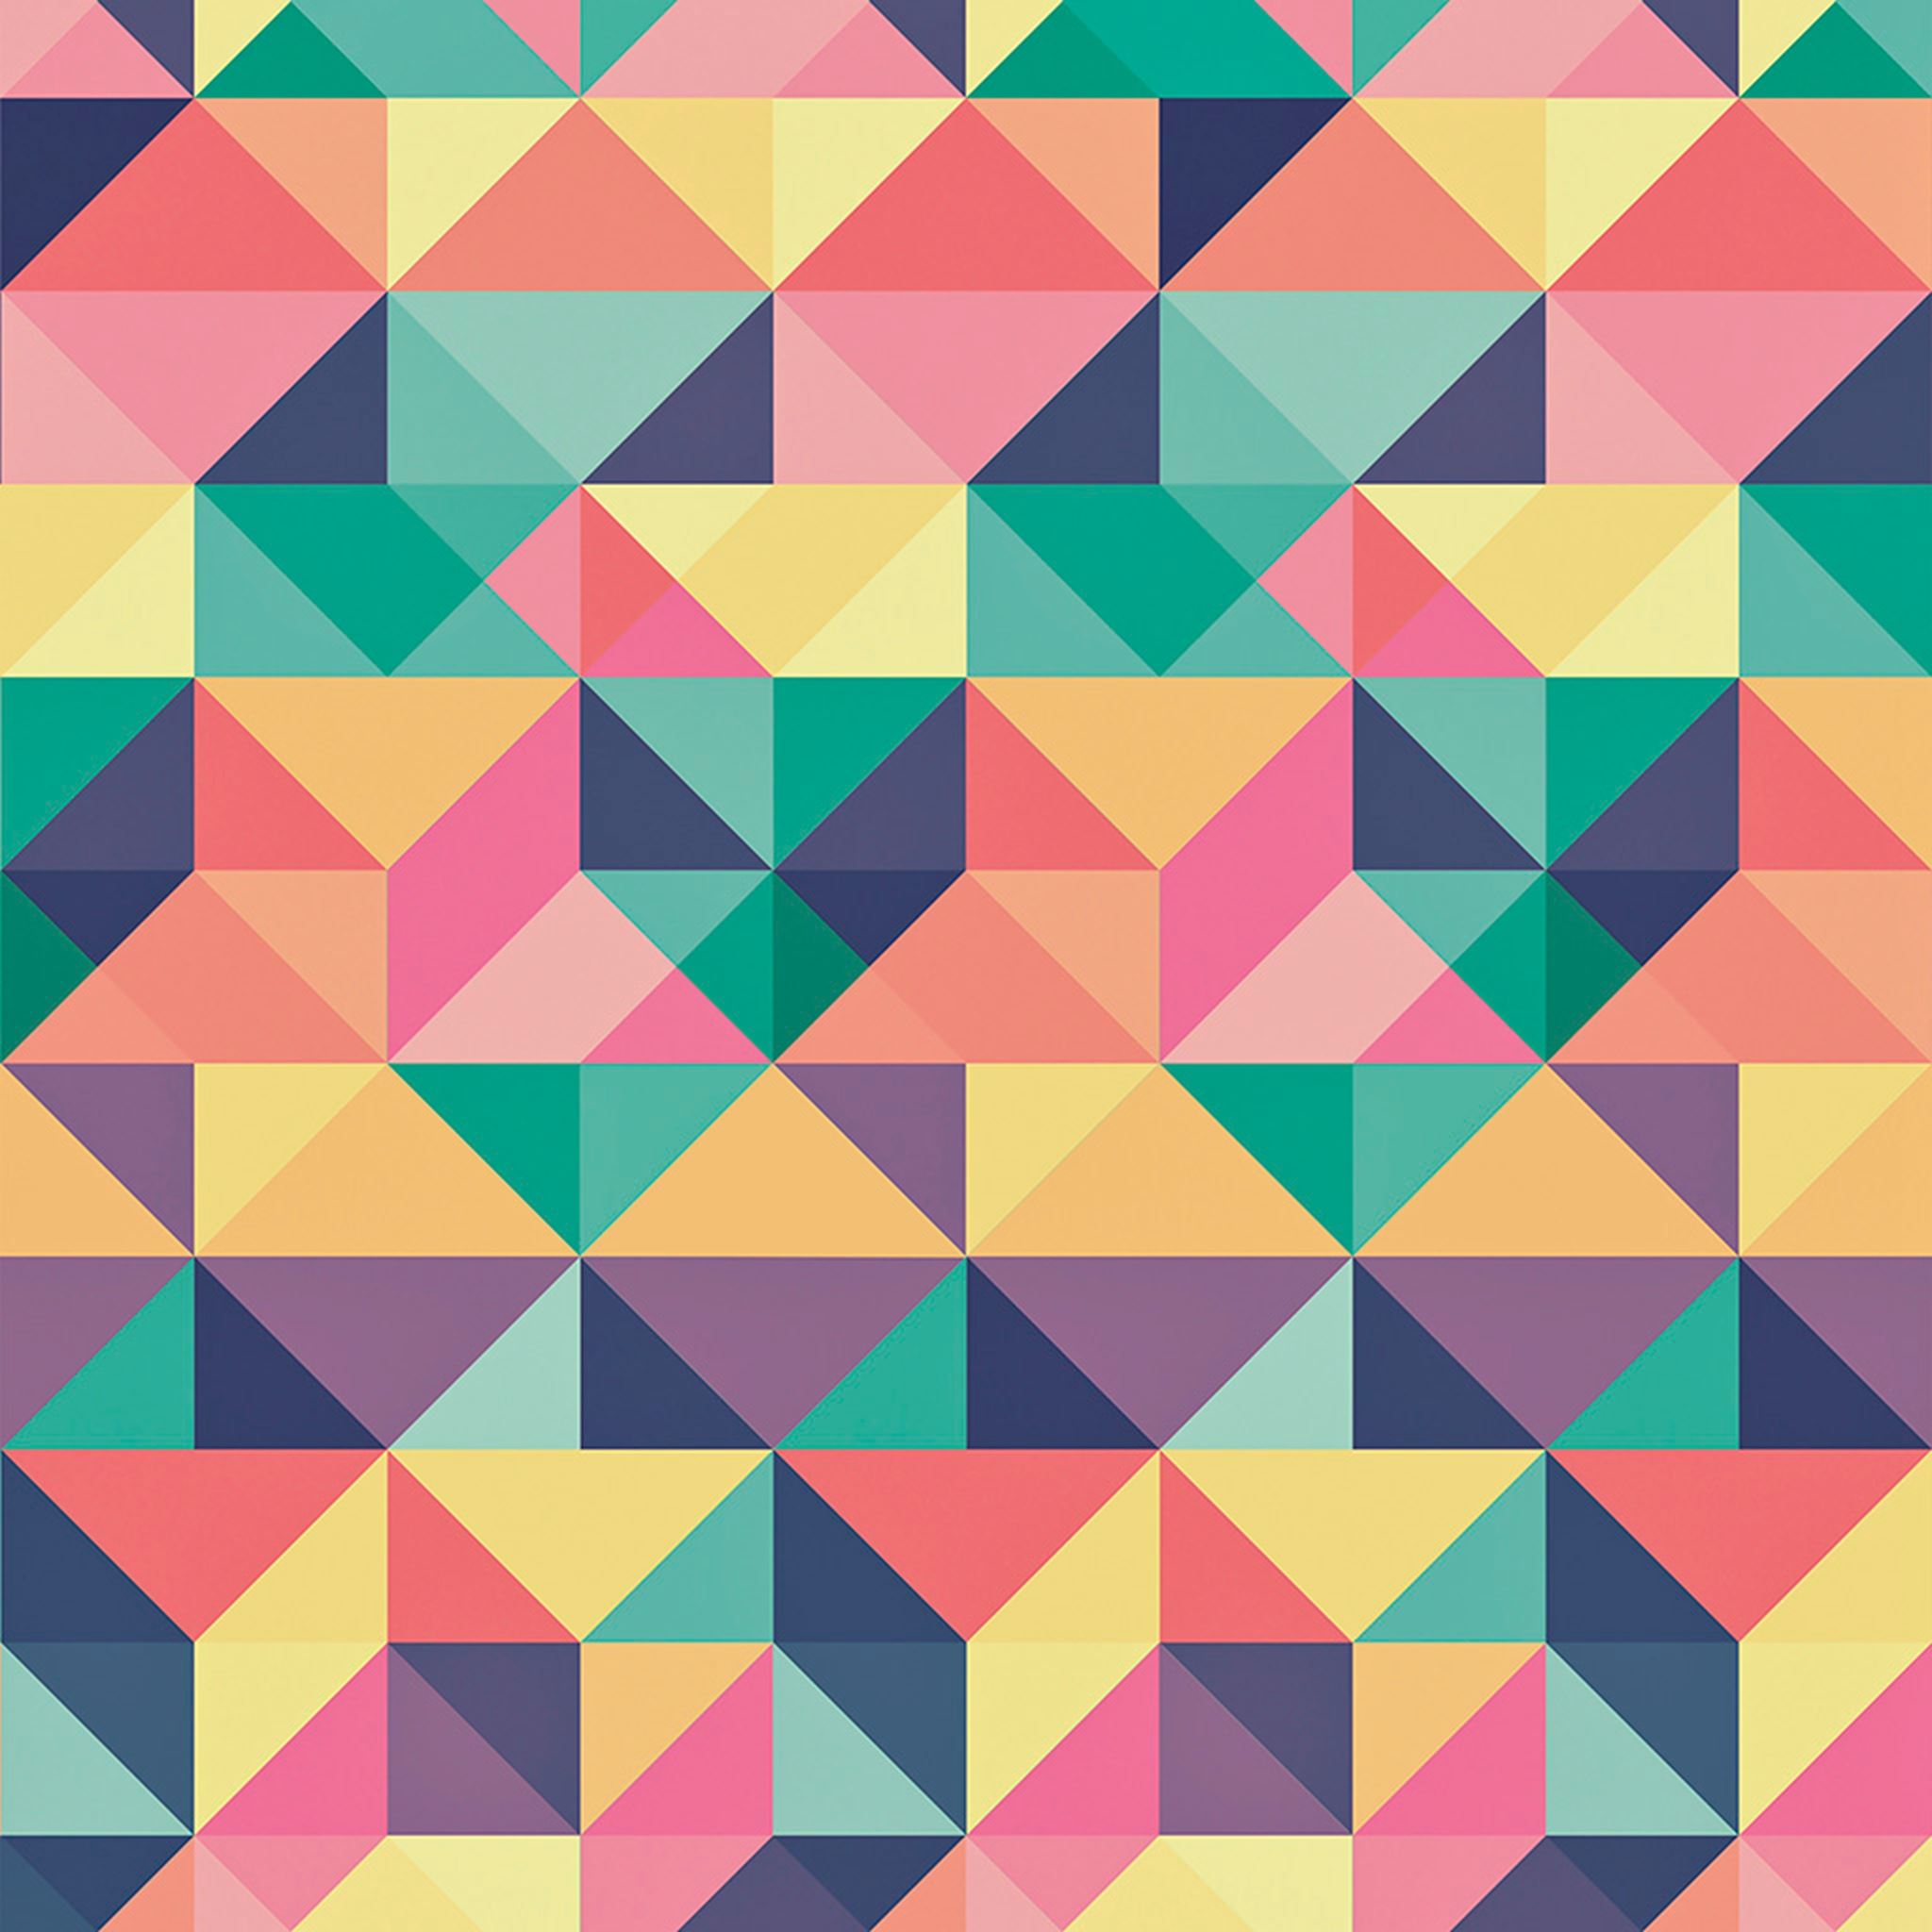 Abstract Polygon Art Pattern Rainbow iPad Air Wallpapers Free Download